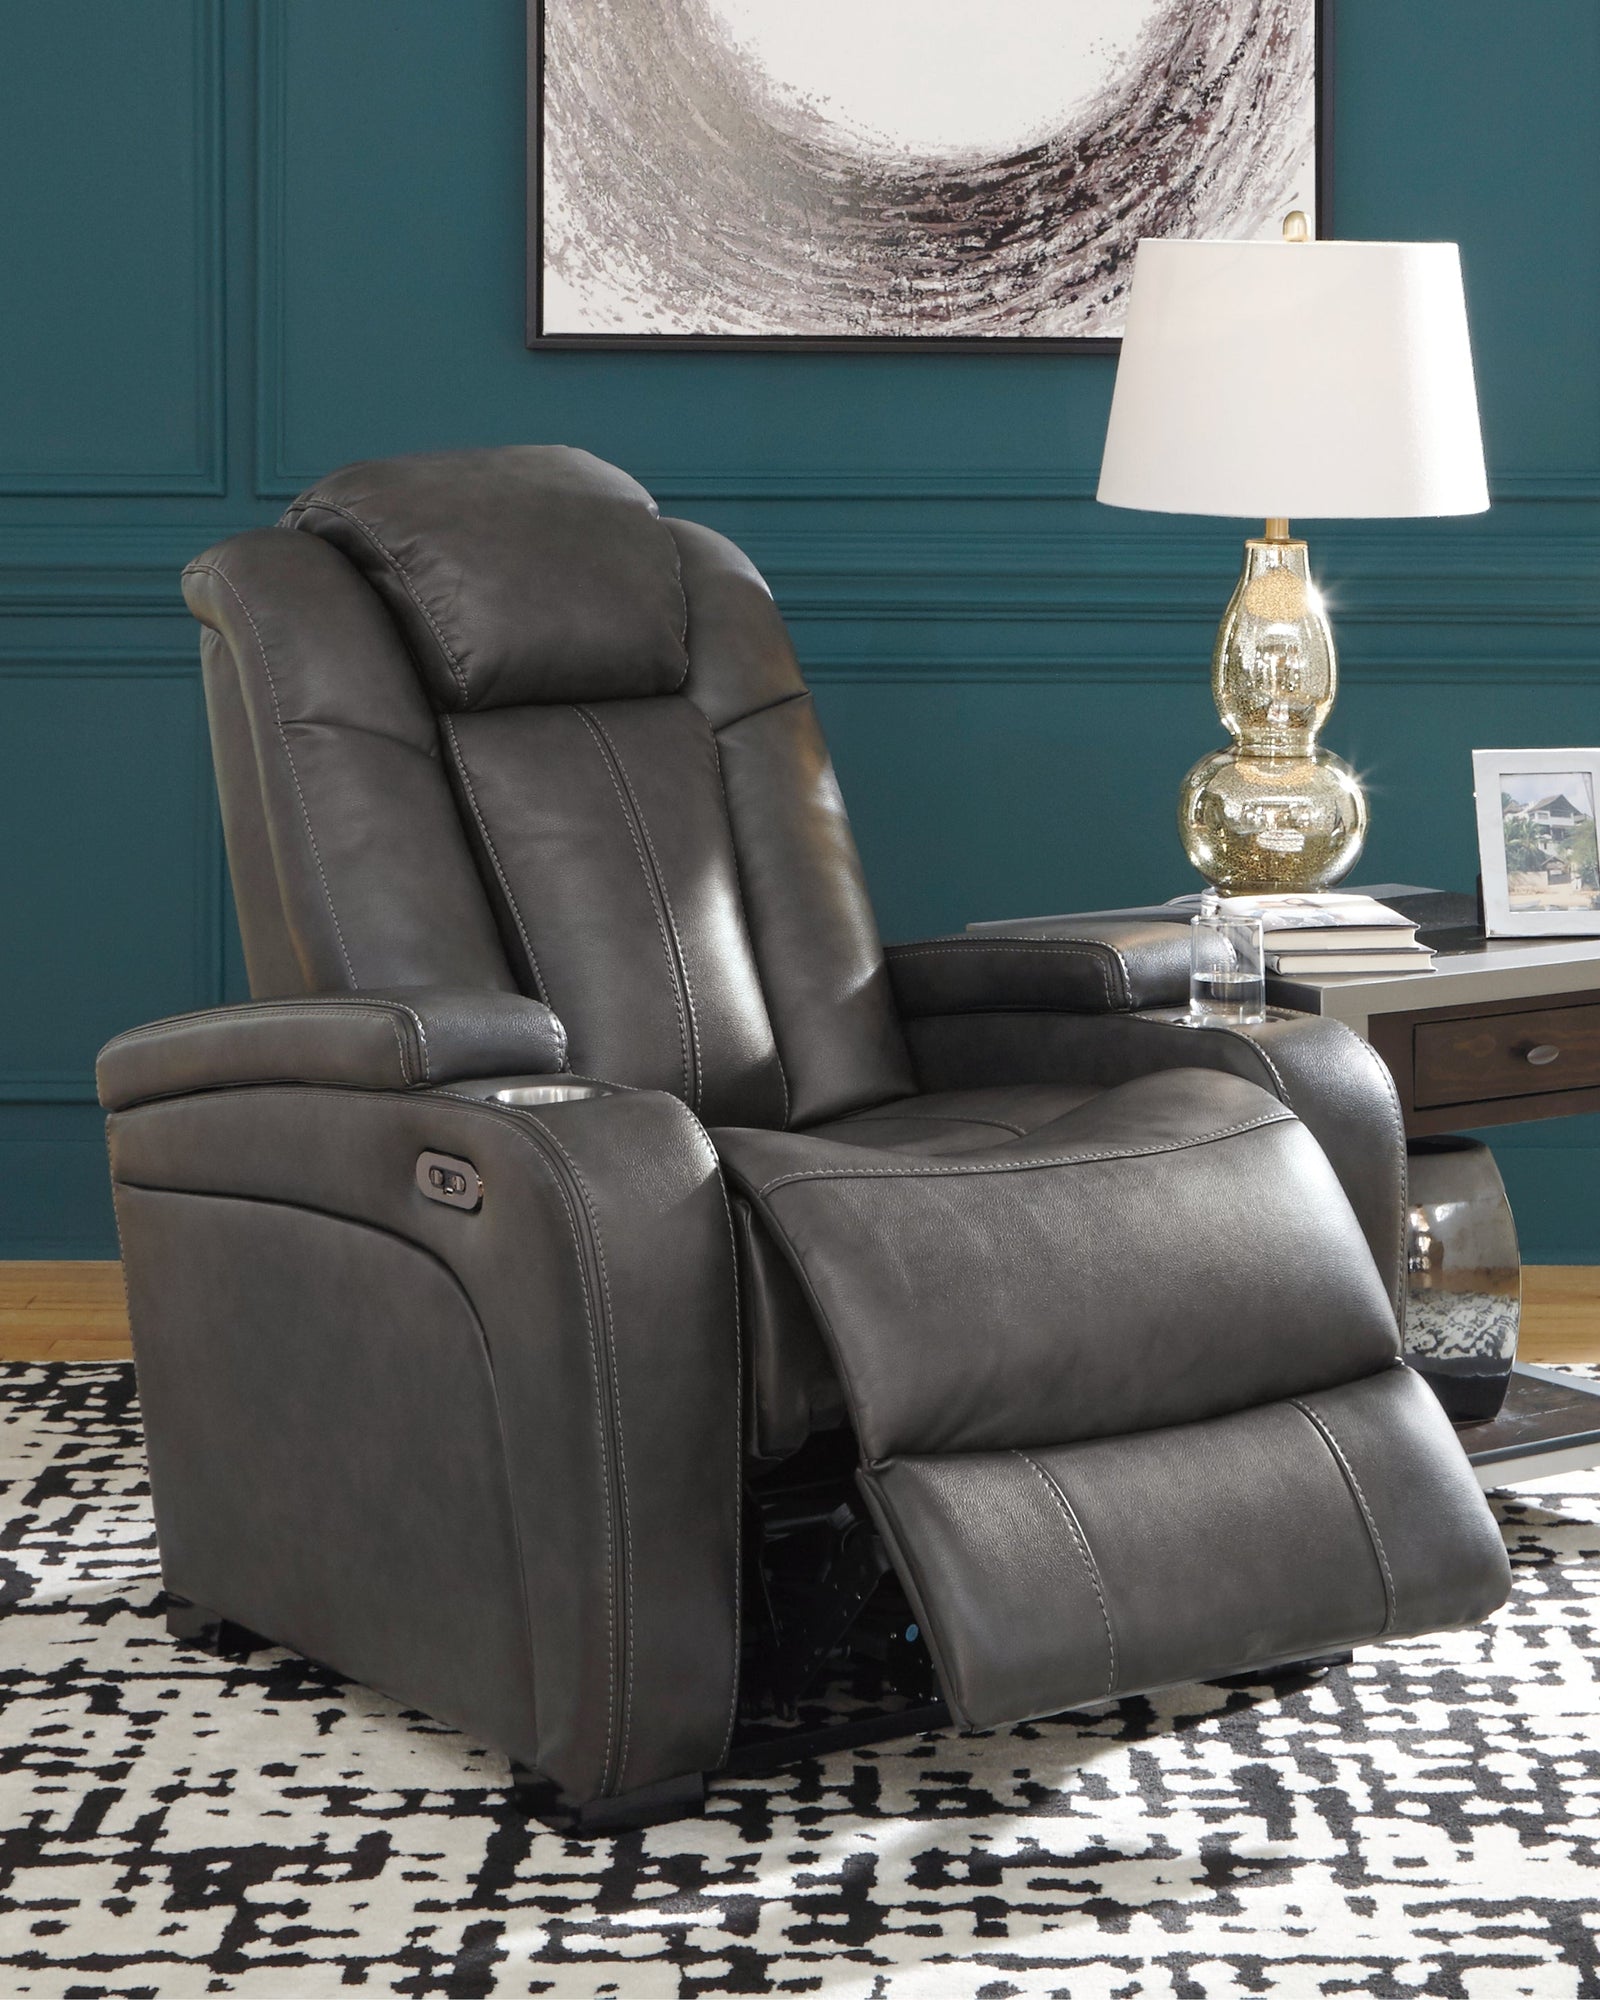 Turbulance Quarry Faux Leather Power Recliner